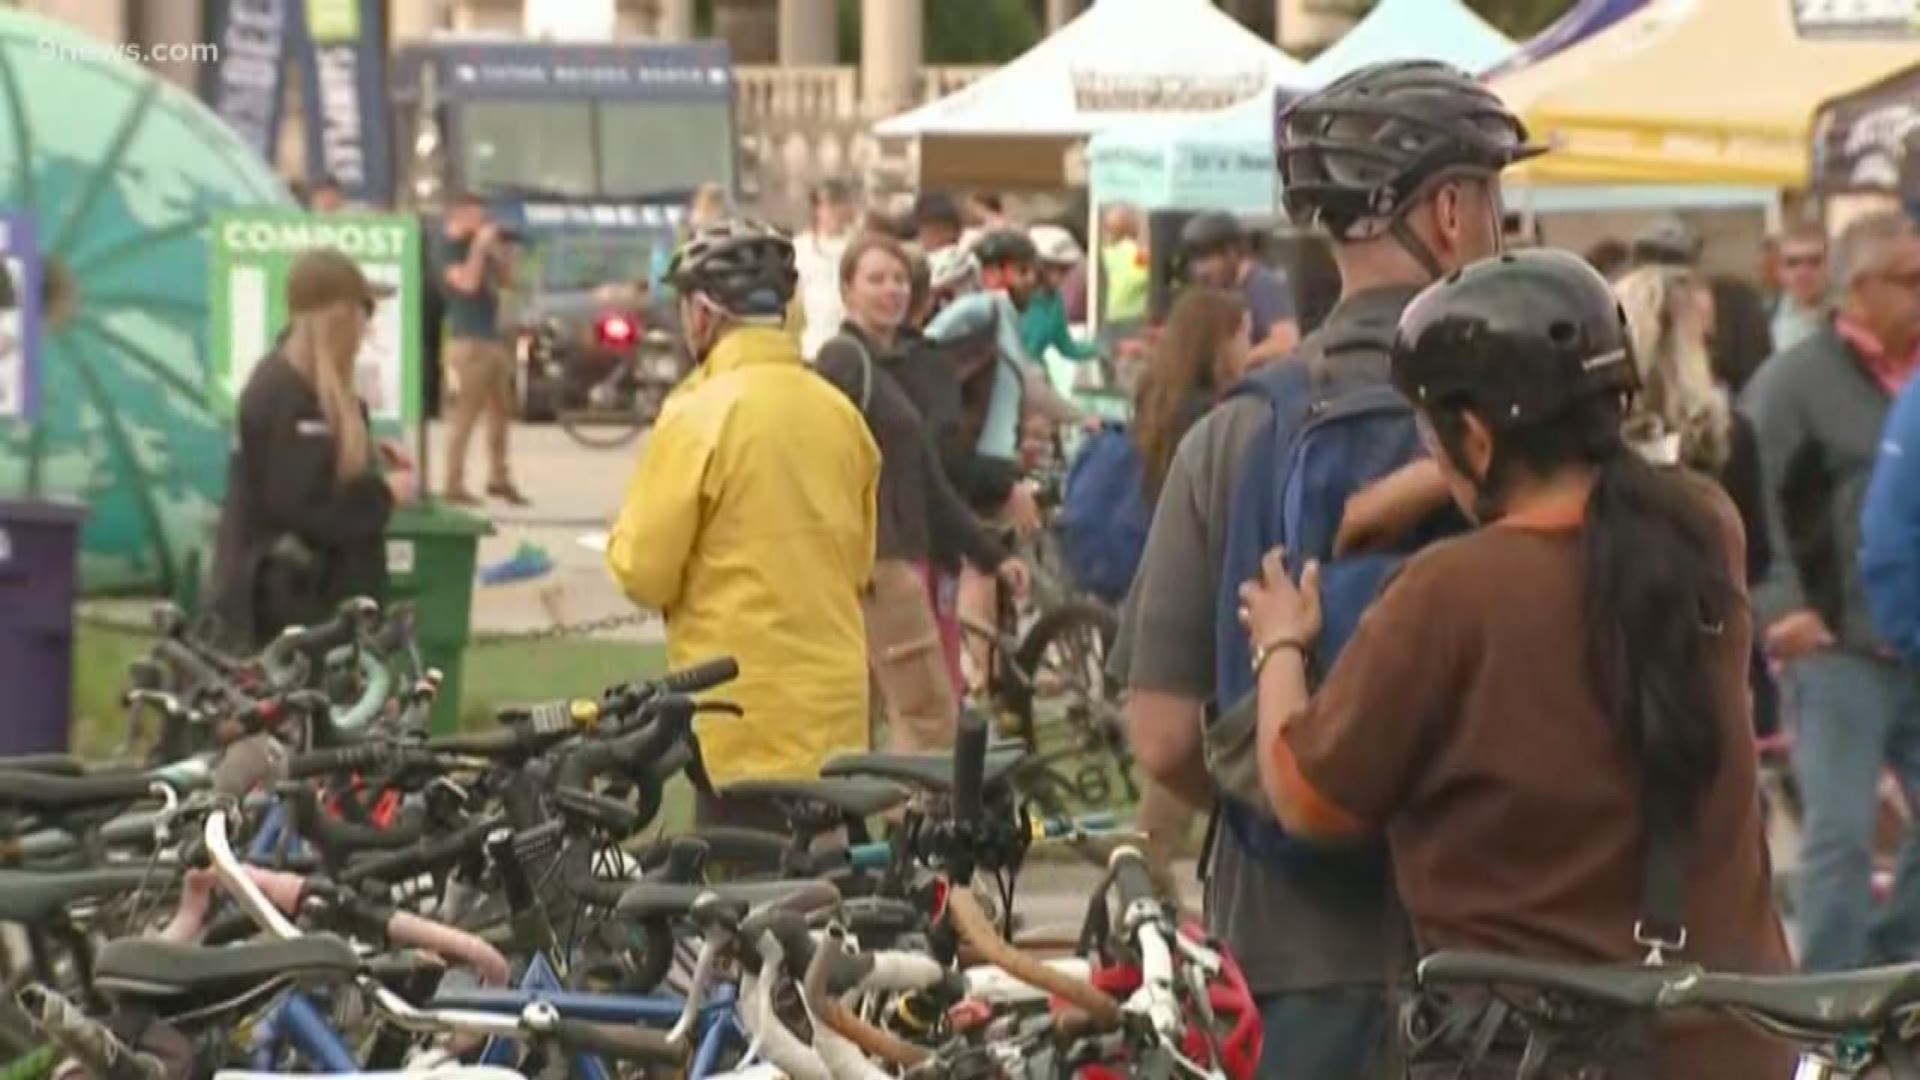 Put some air in your tires! The 29th annual Bike to Work Day is on Wednesday in cities across Colorado.